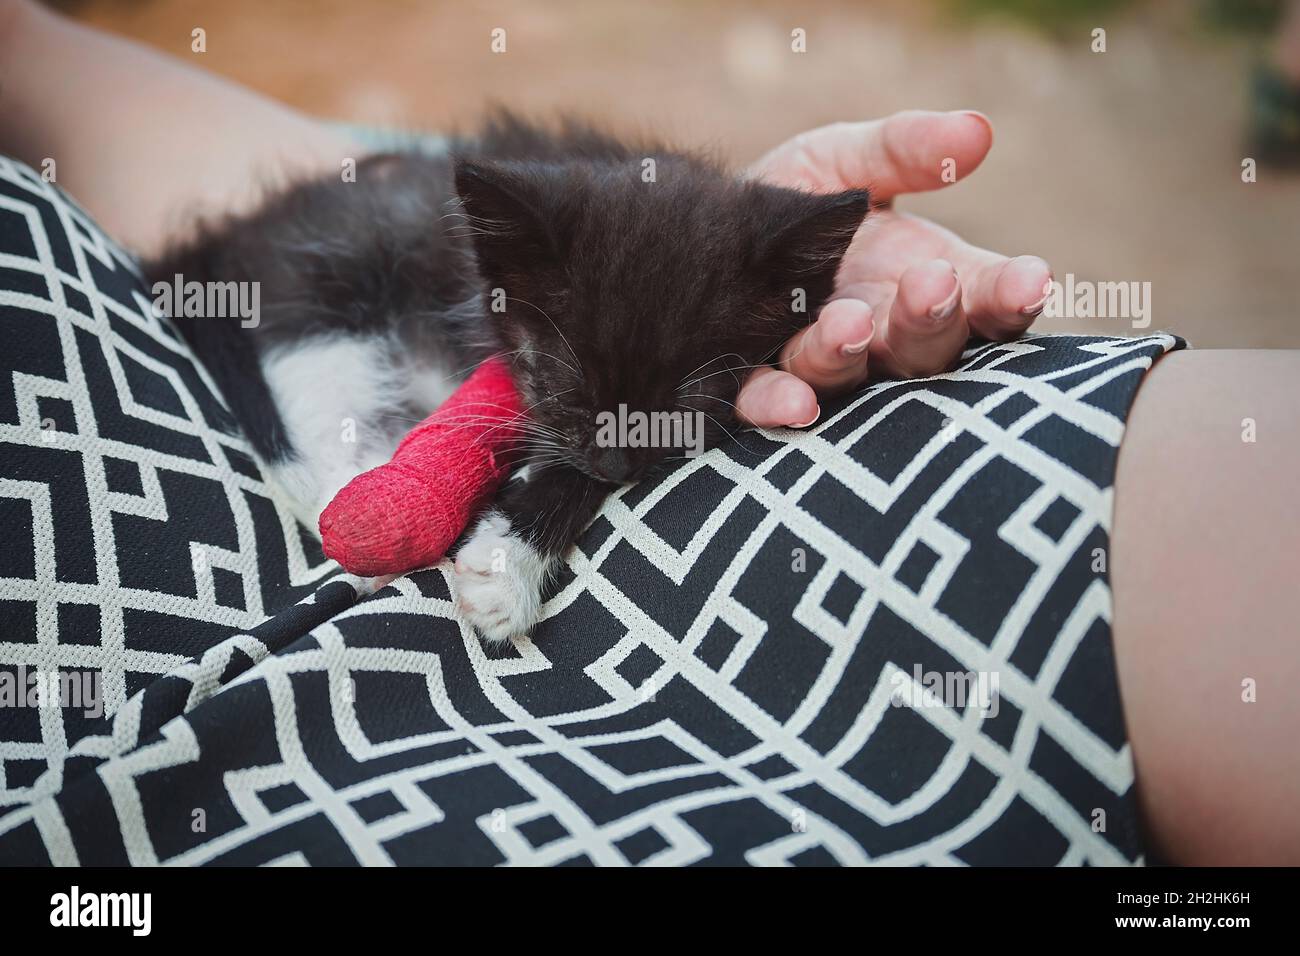 Kitten with injured leg in red plaster cast sleeping on woman's hand Stock Photo